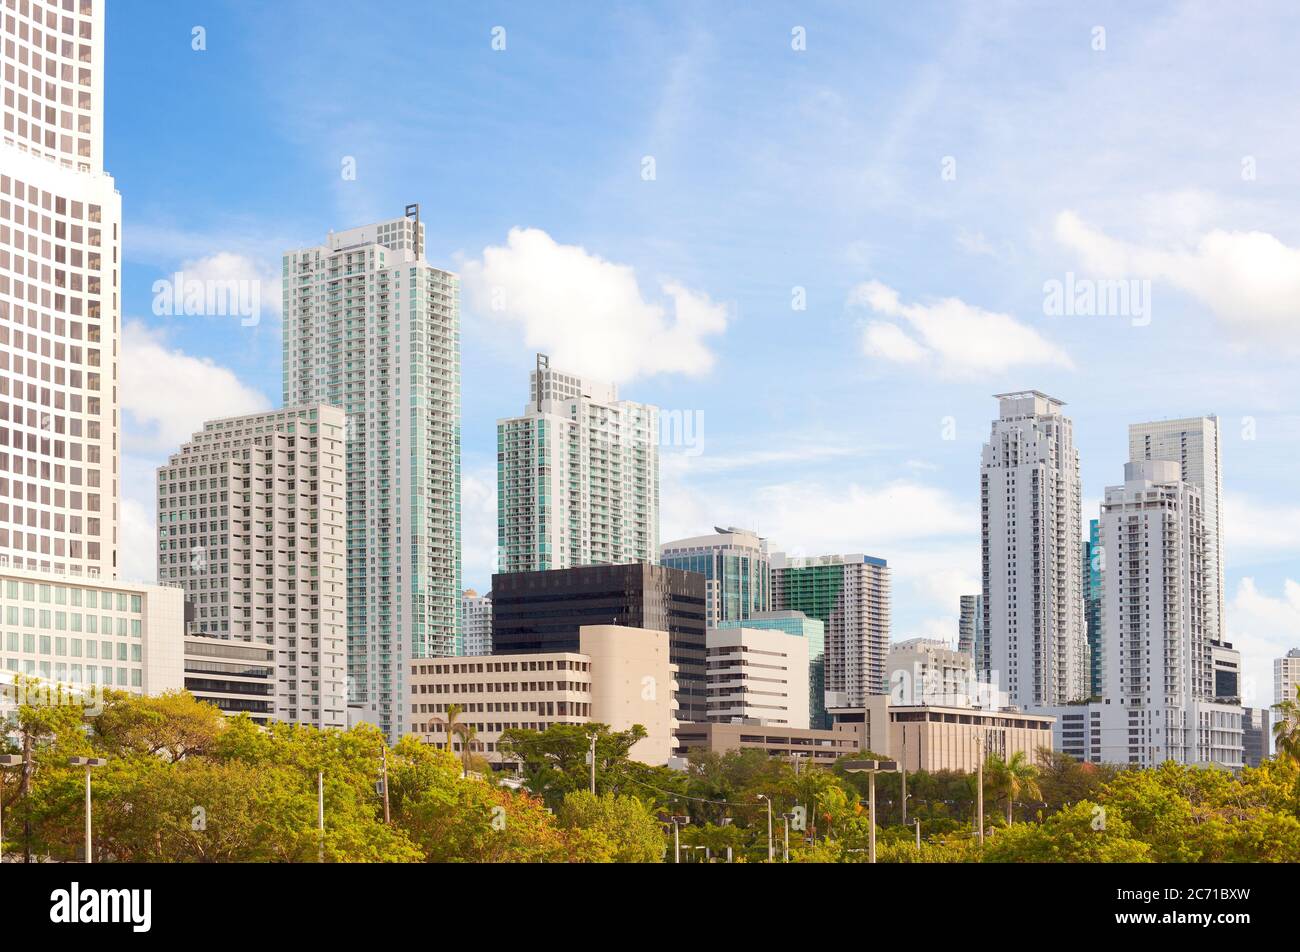 Skyline of apartment buildings at city downtown, Miami, Florida, United States Stock Photo